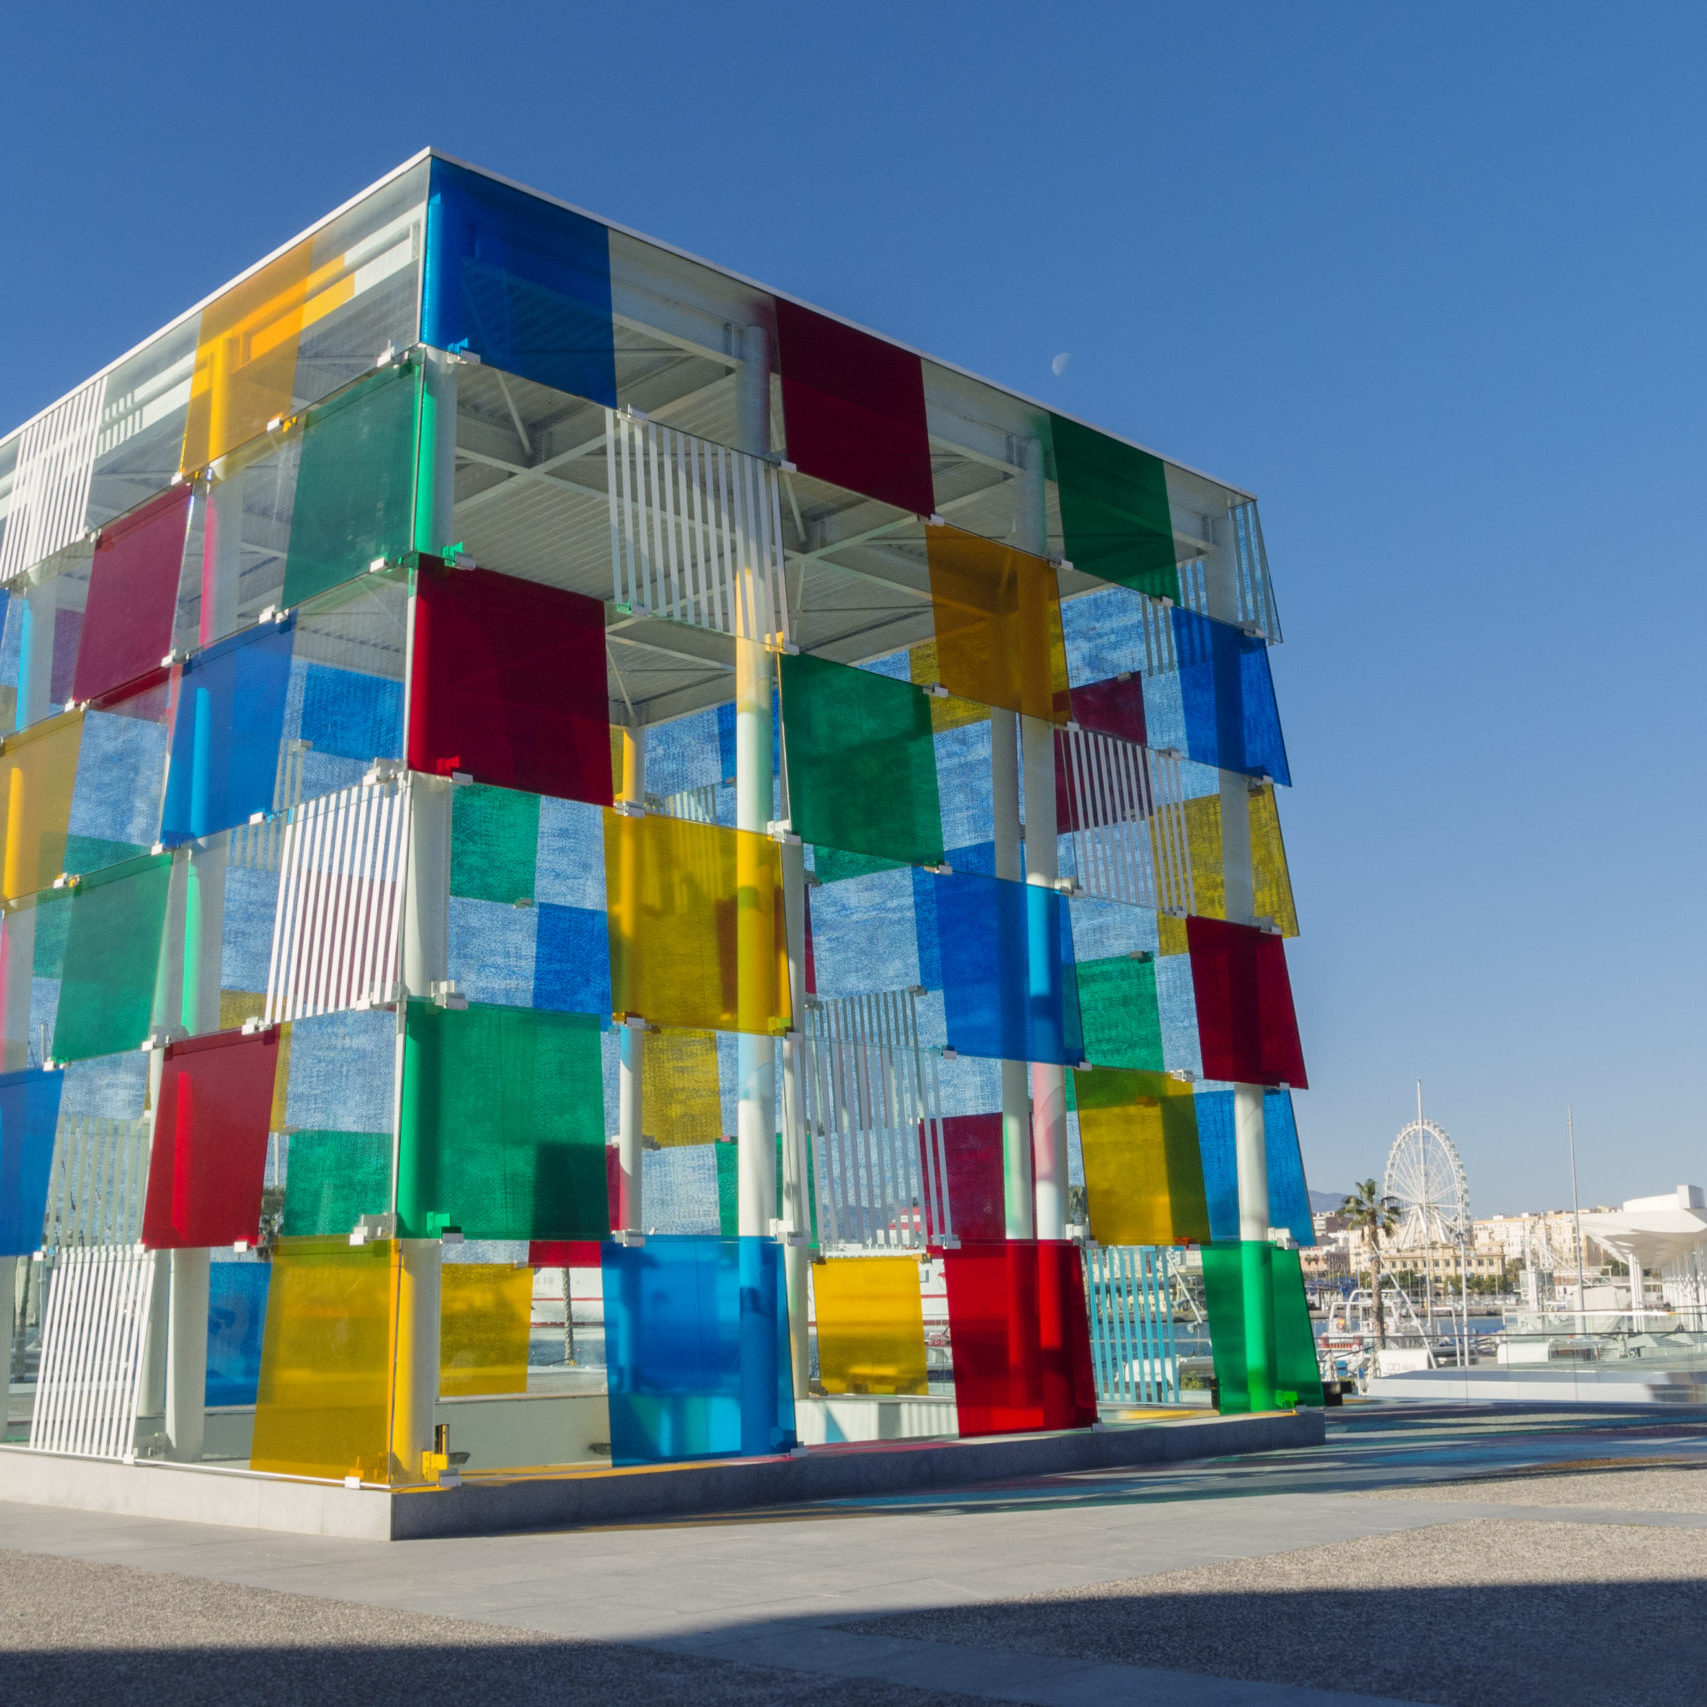 Málaga, Andalucia, Spain – March 1, 2016: Centre Pompidou Málaga, an iconic building also known as “El Cubo” (“the Cube”), located on the harbour.